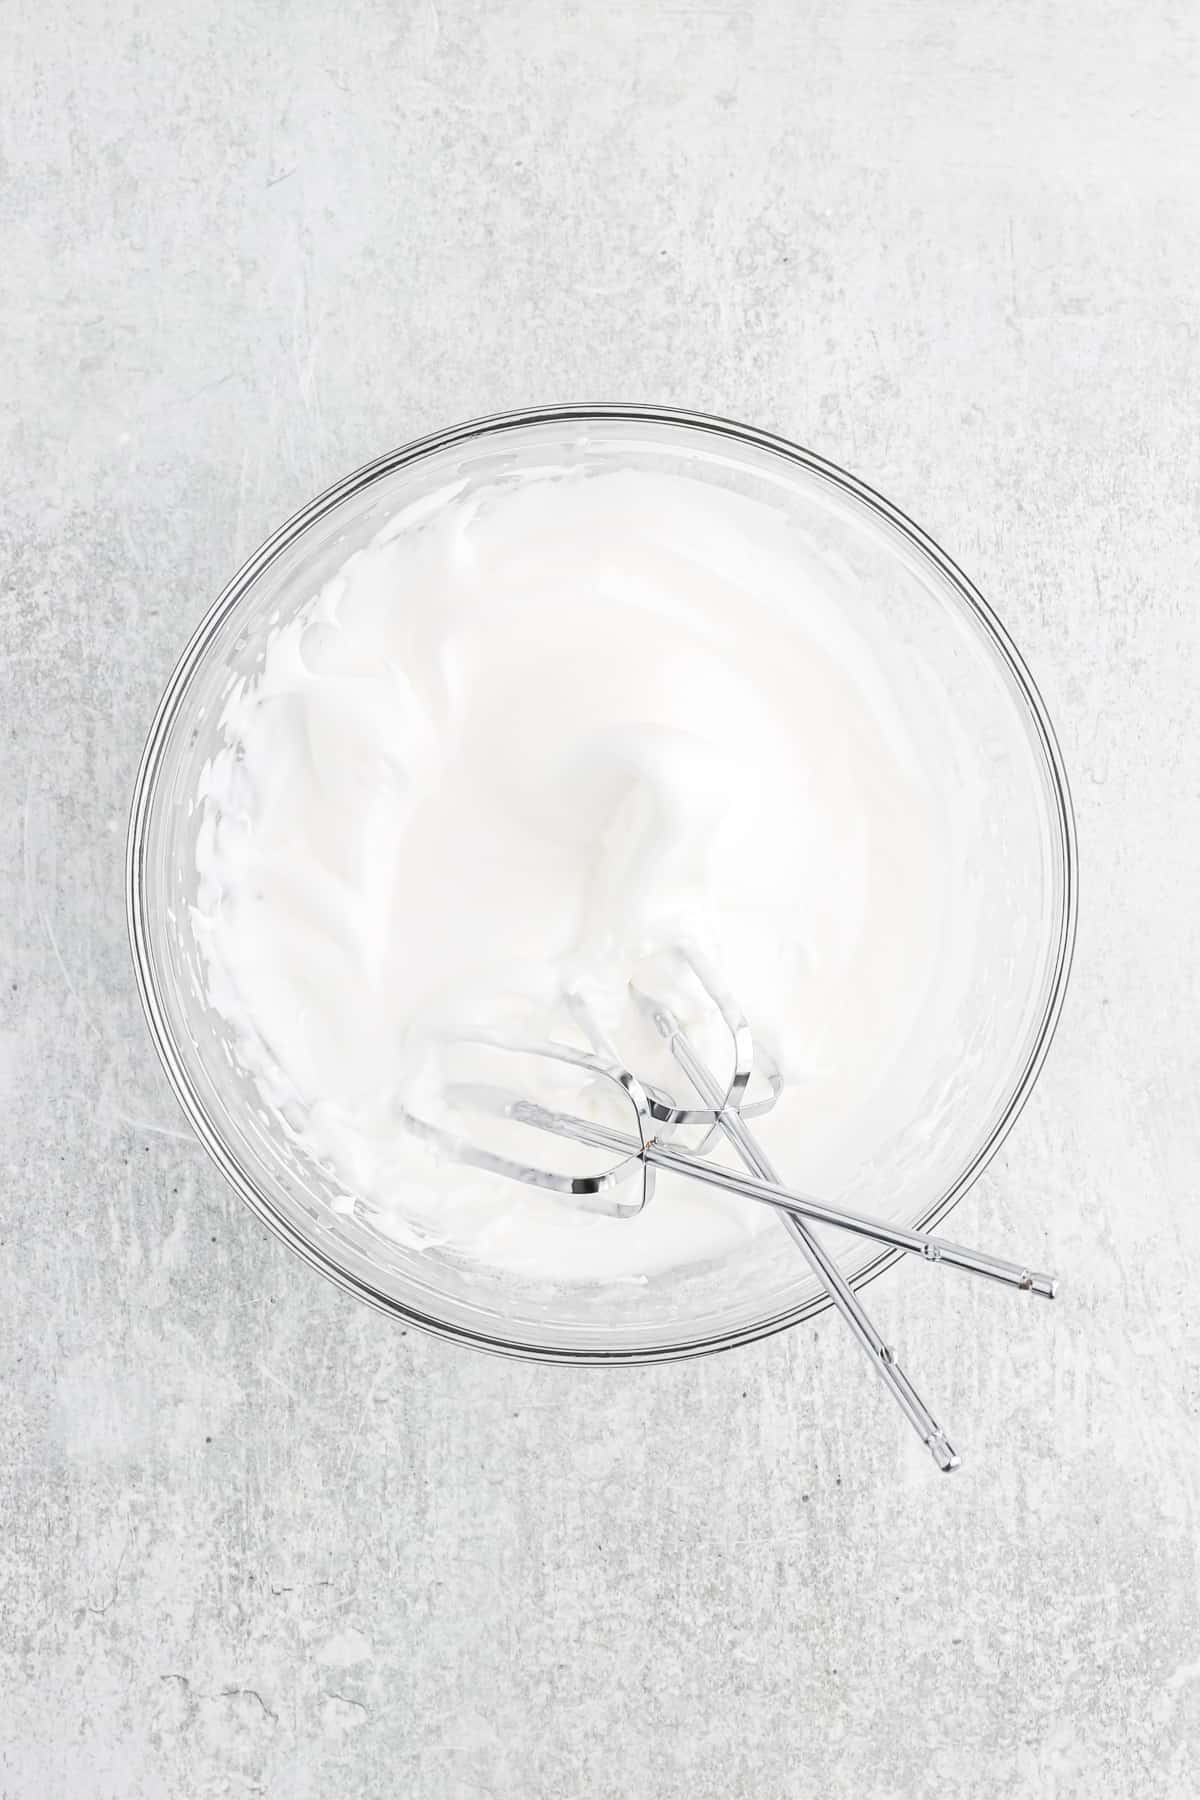 Egg whites whipped into a meringue in a glass mixing bowl.